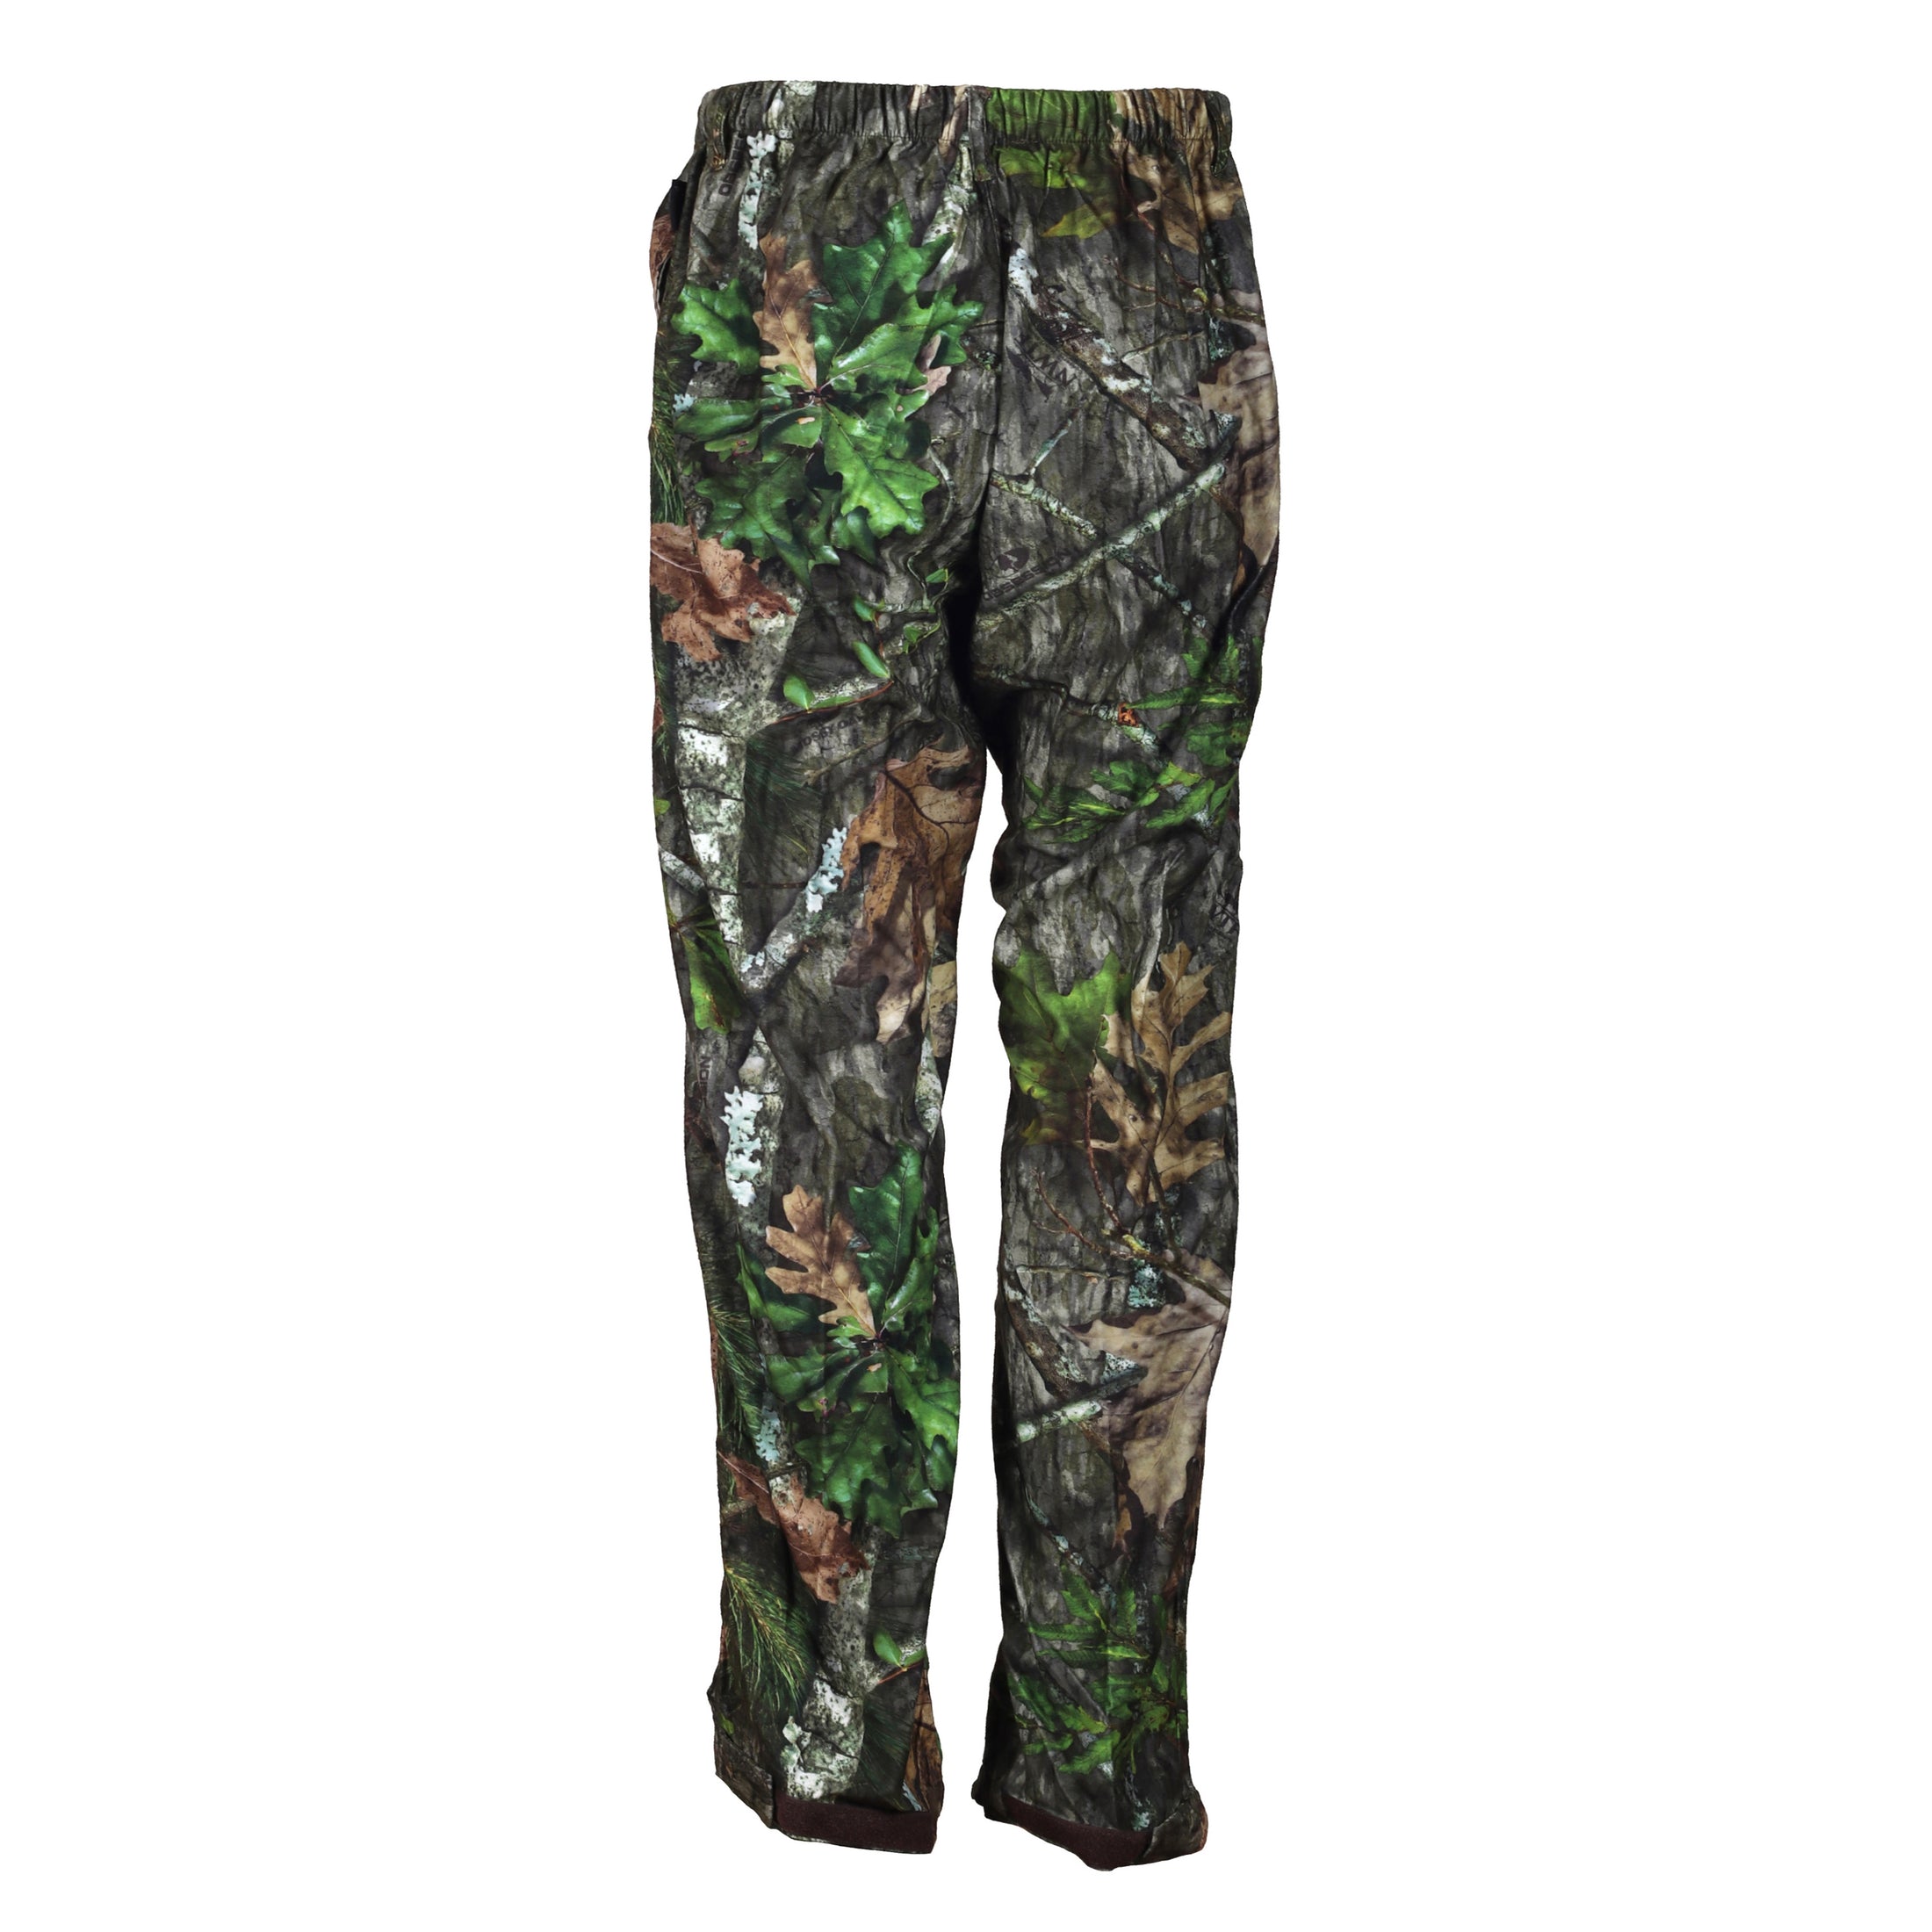 gamehdie ElimiTick Insect Repellent Cover Up Pant back (mossy oak obsession)